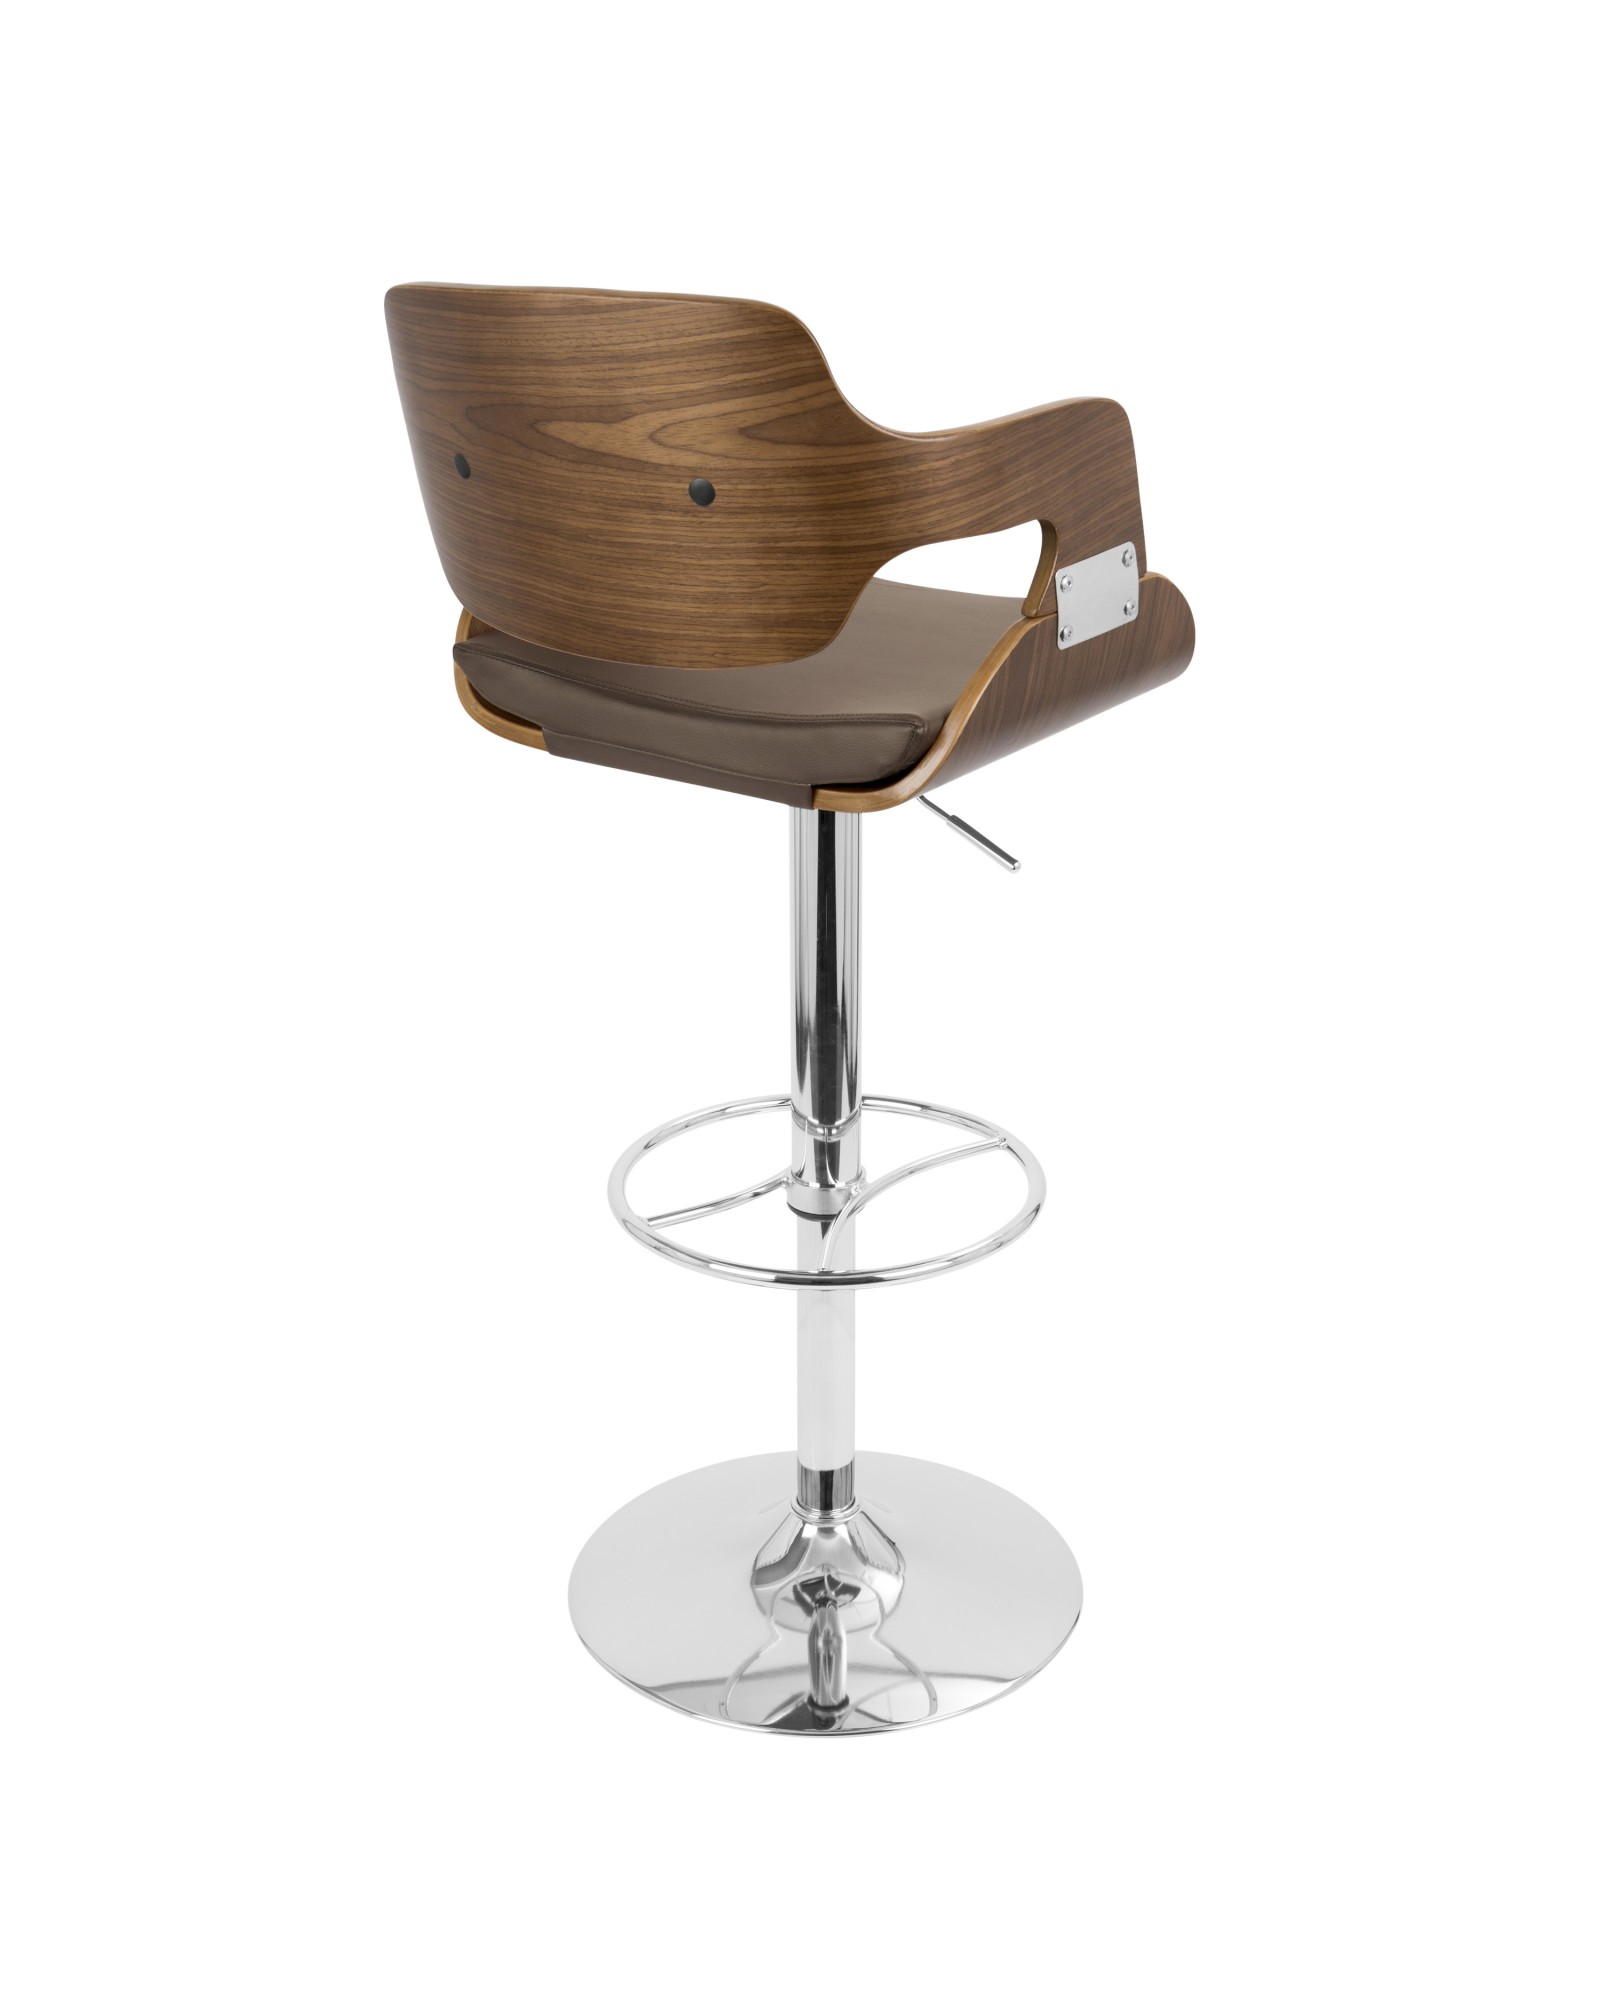 Fiore Height Adjustable Mid-century Modern Barstool with Swivel in Walnut and Brown